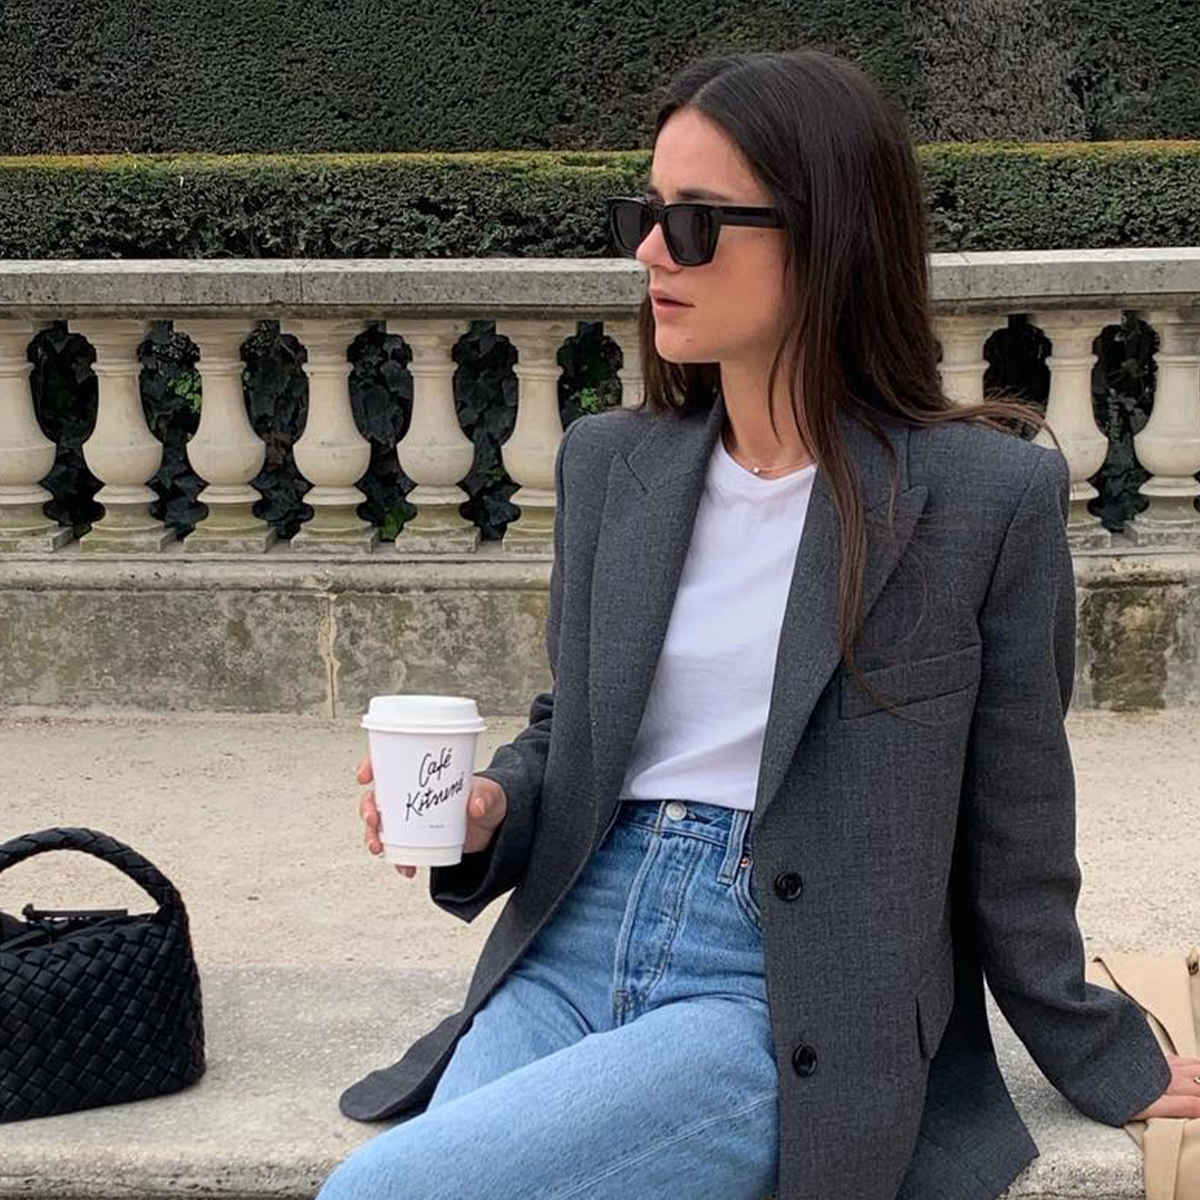 French Women All Own These 7 Items, and I Found Them on Sale at Nordstrom